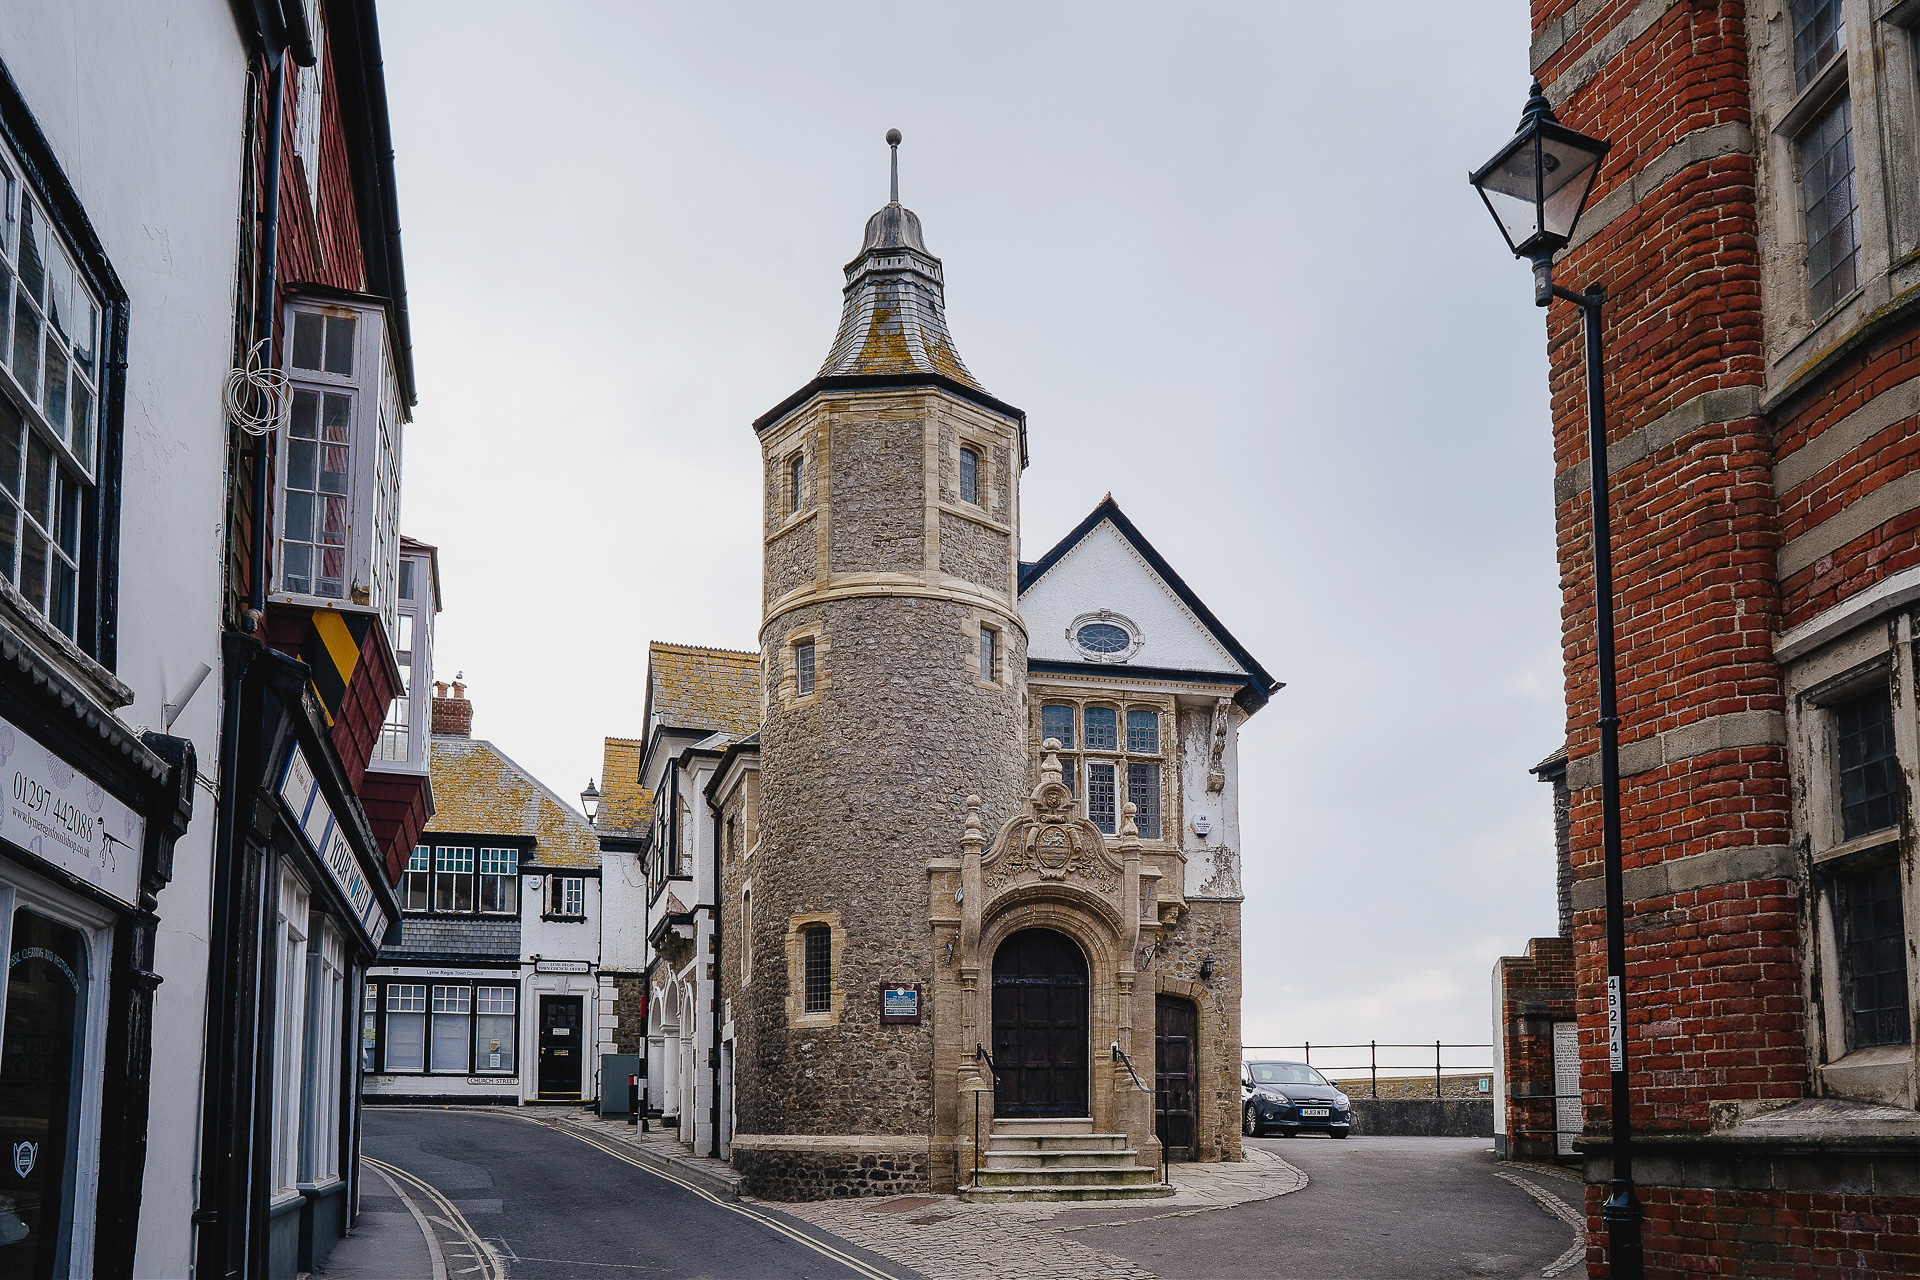 Exterior shot of the Guildhall at Lyme Regis